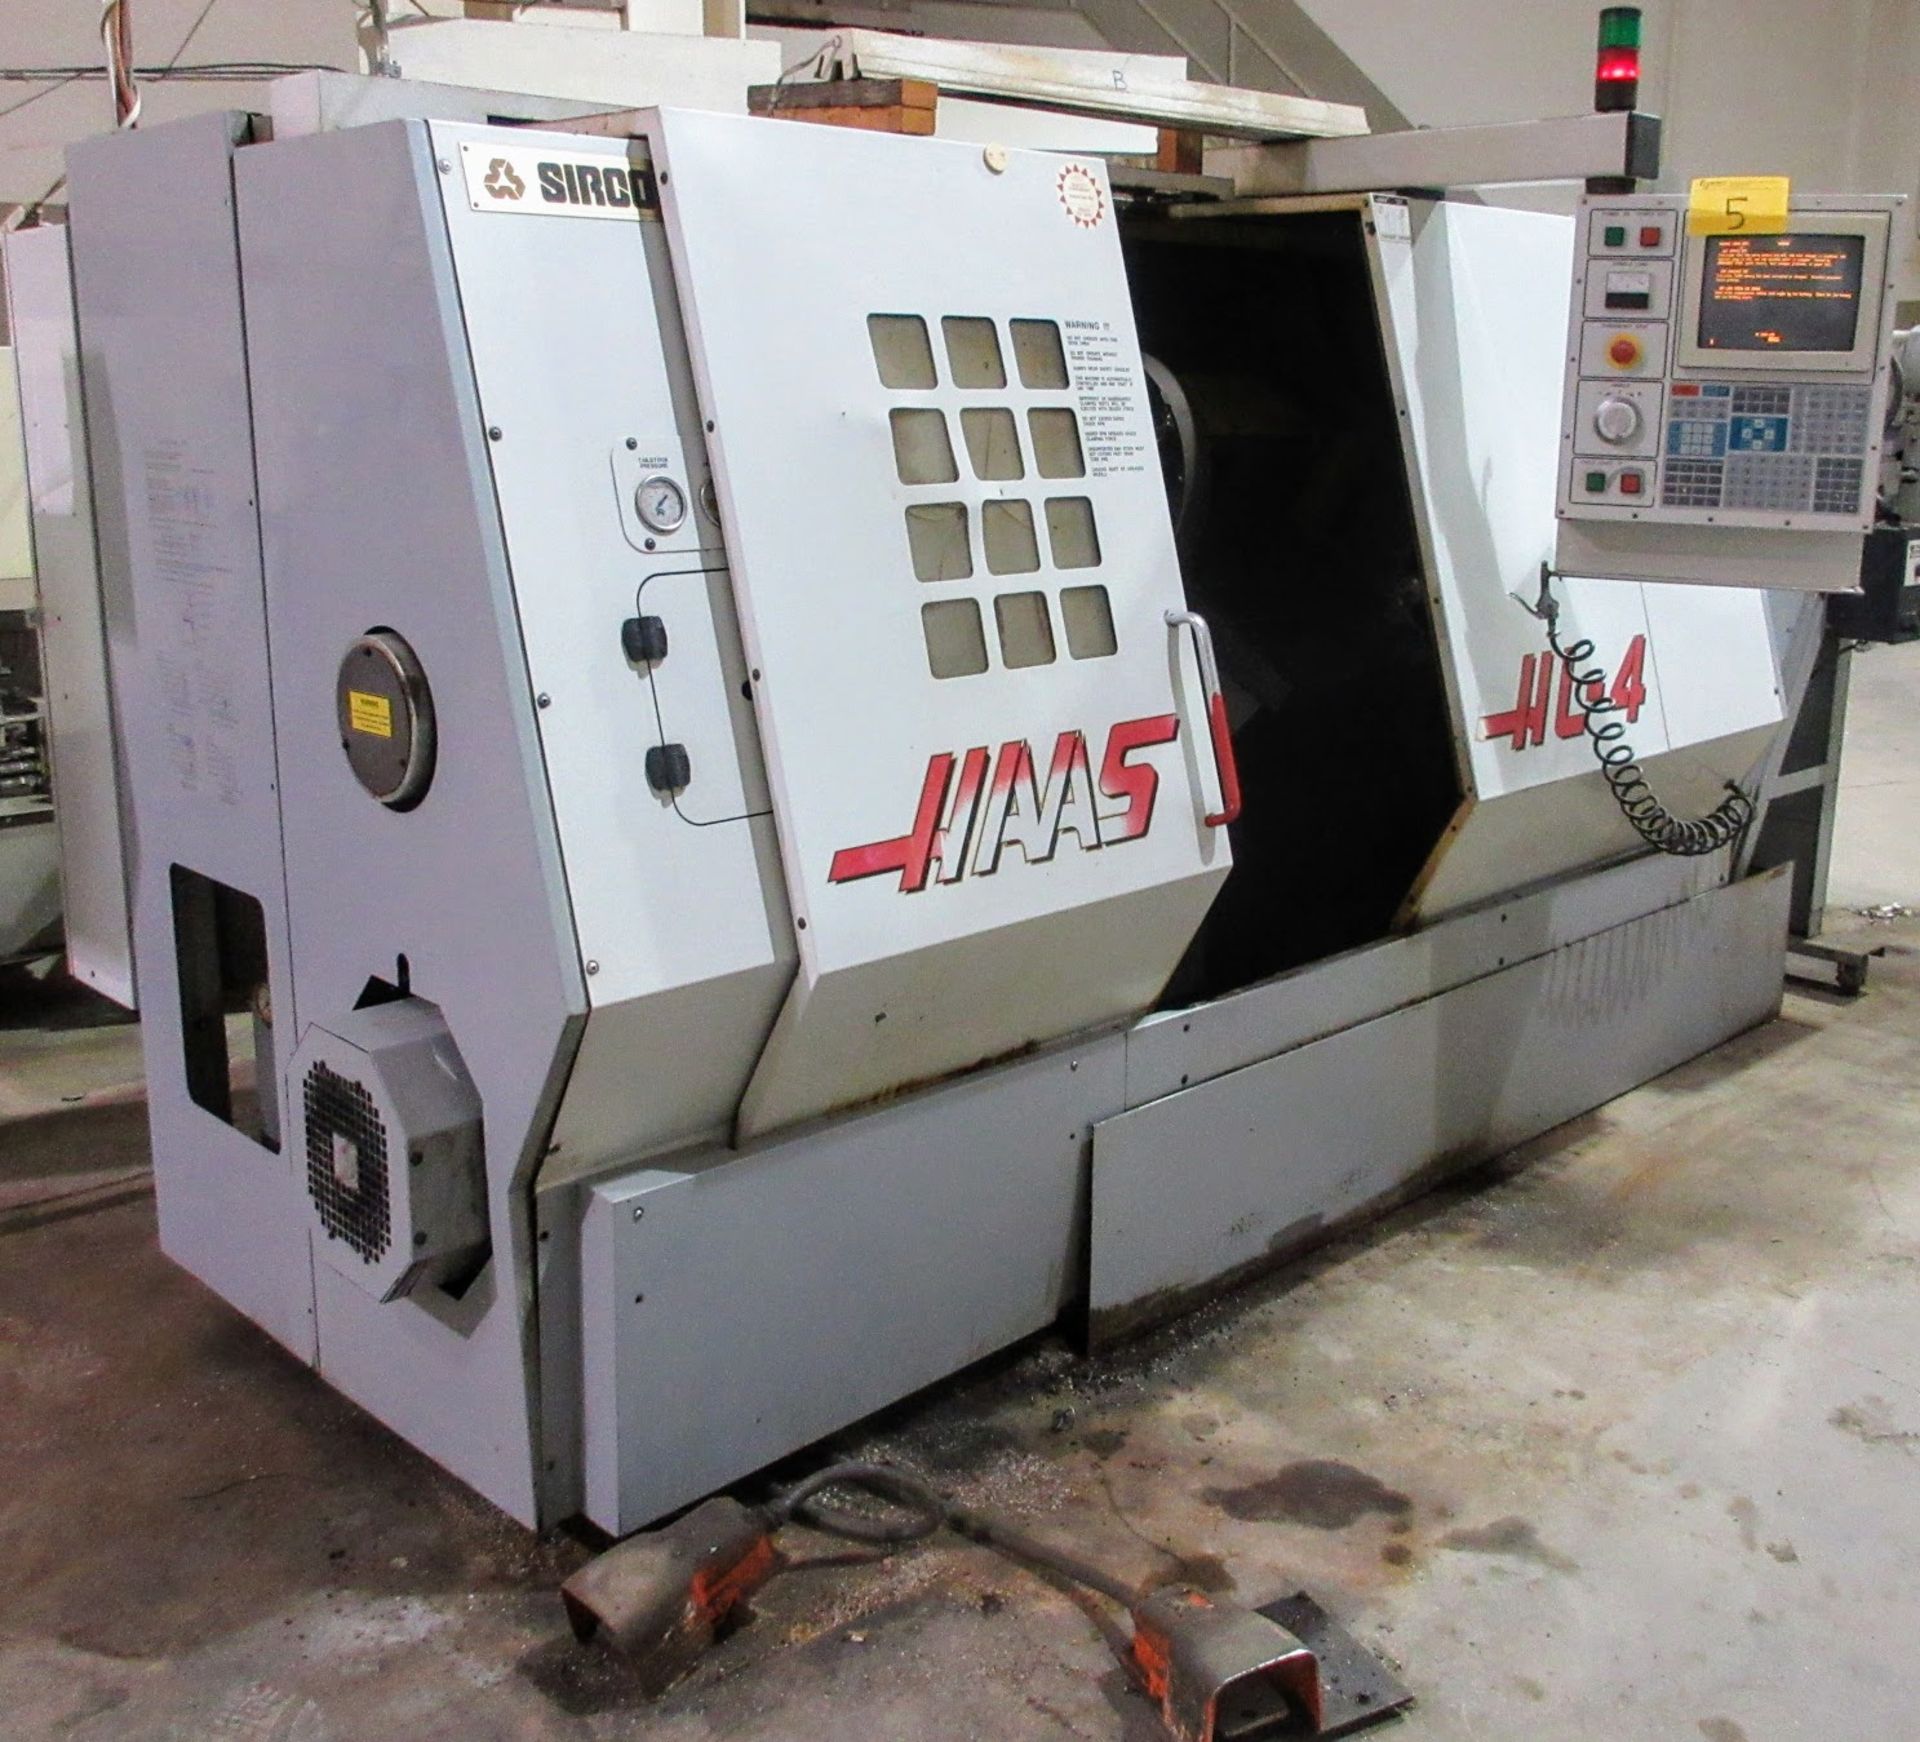 HAAS HL4 CNC LATHE, S/N 61664, CNC CONTROL, 10” 3-JAW CHUCK, TOOL PRESETTER, 12-STATION TURRET, - Image 2 of 21